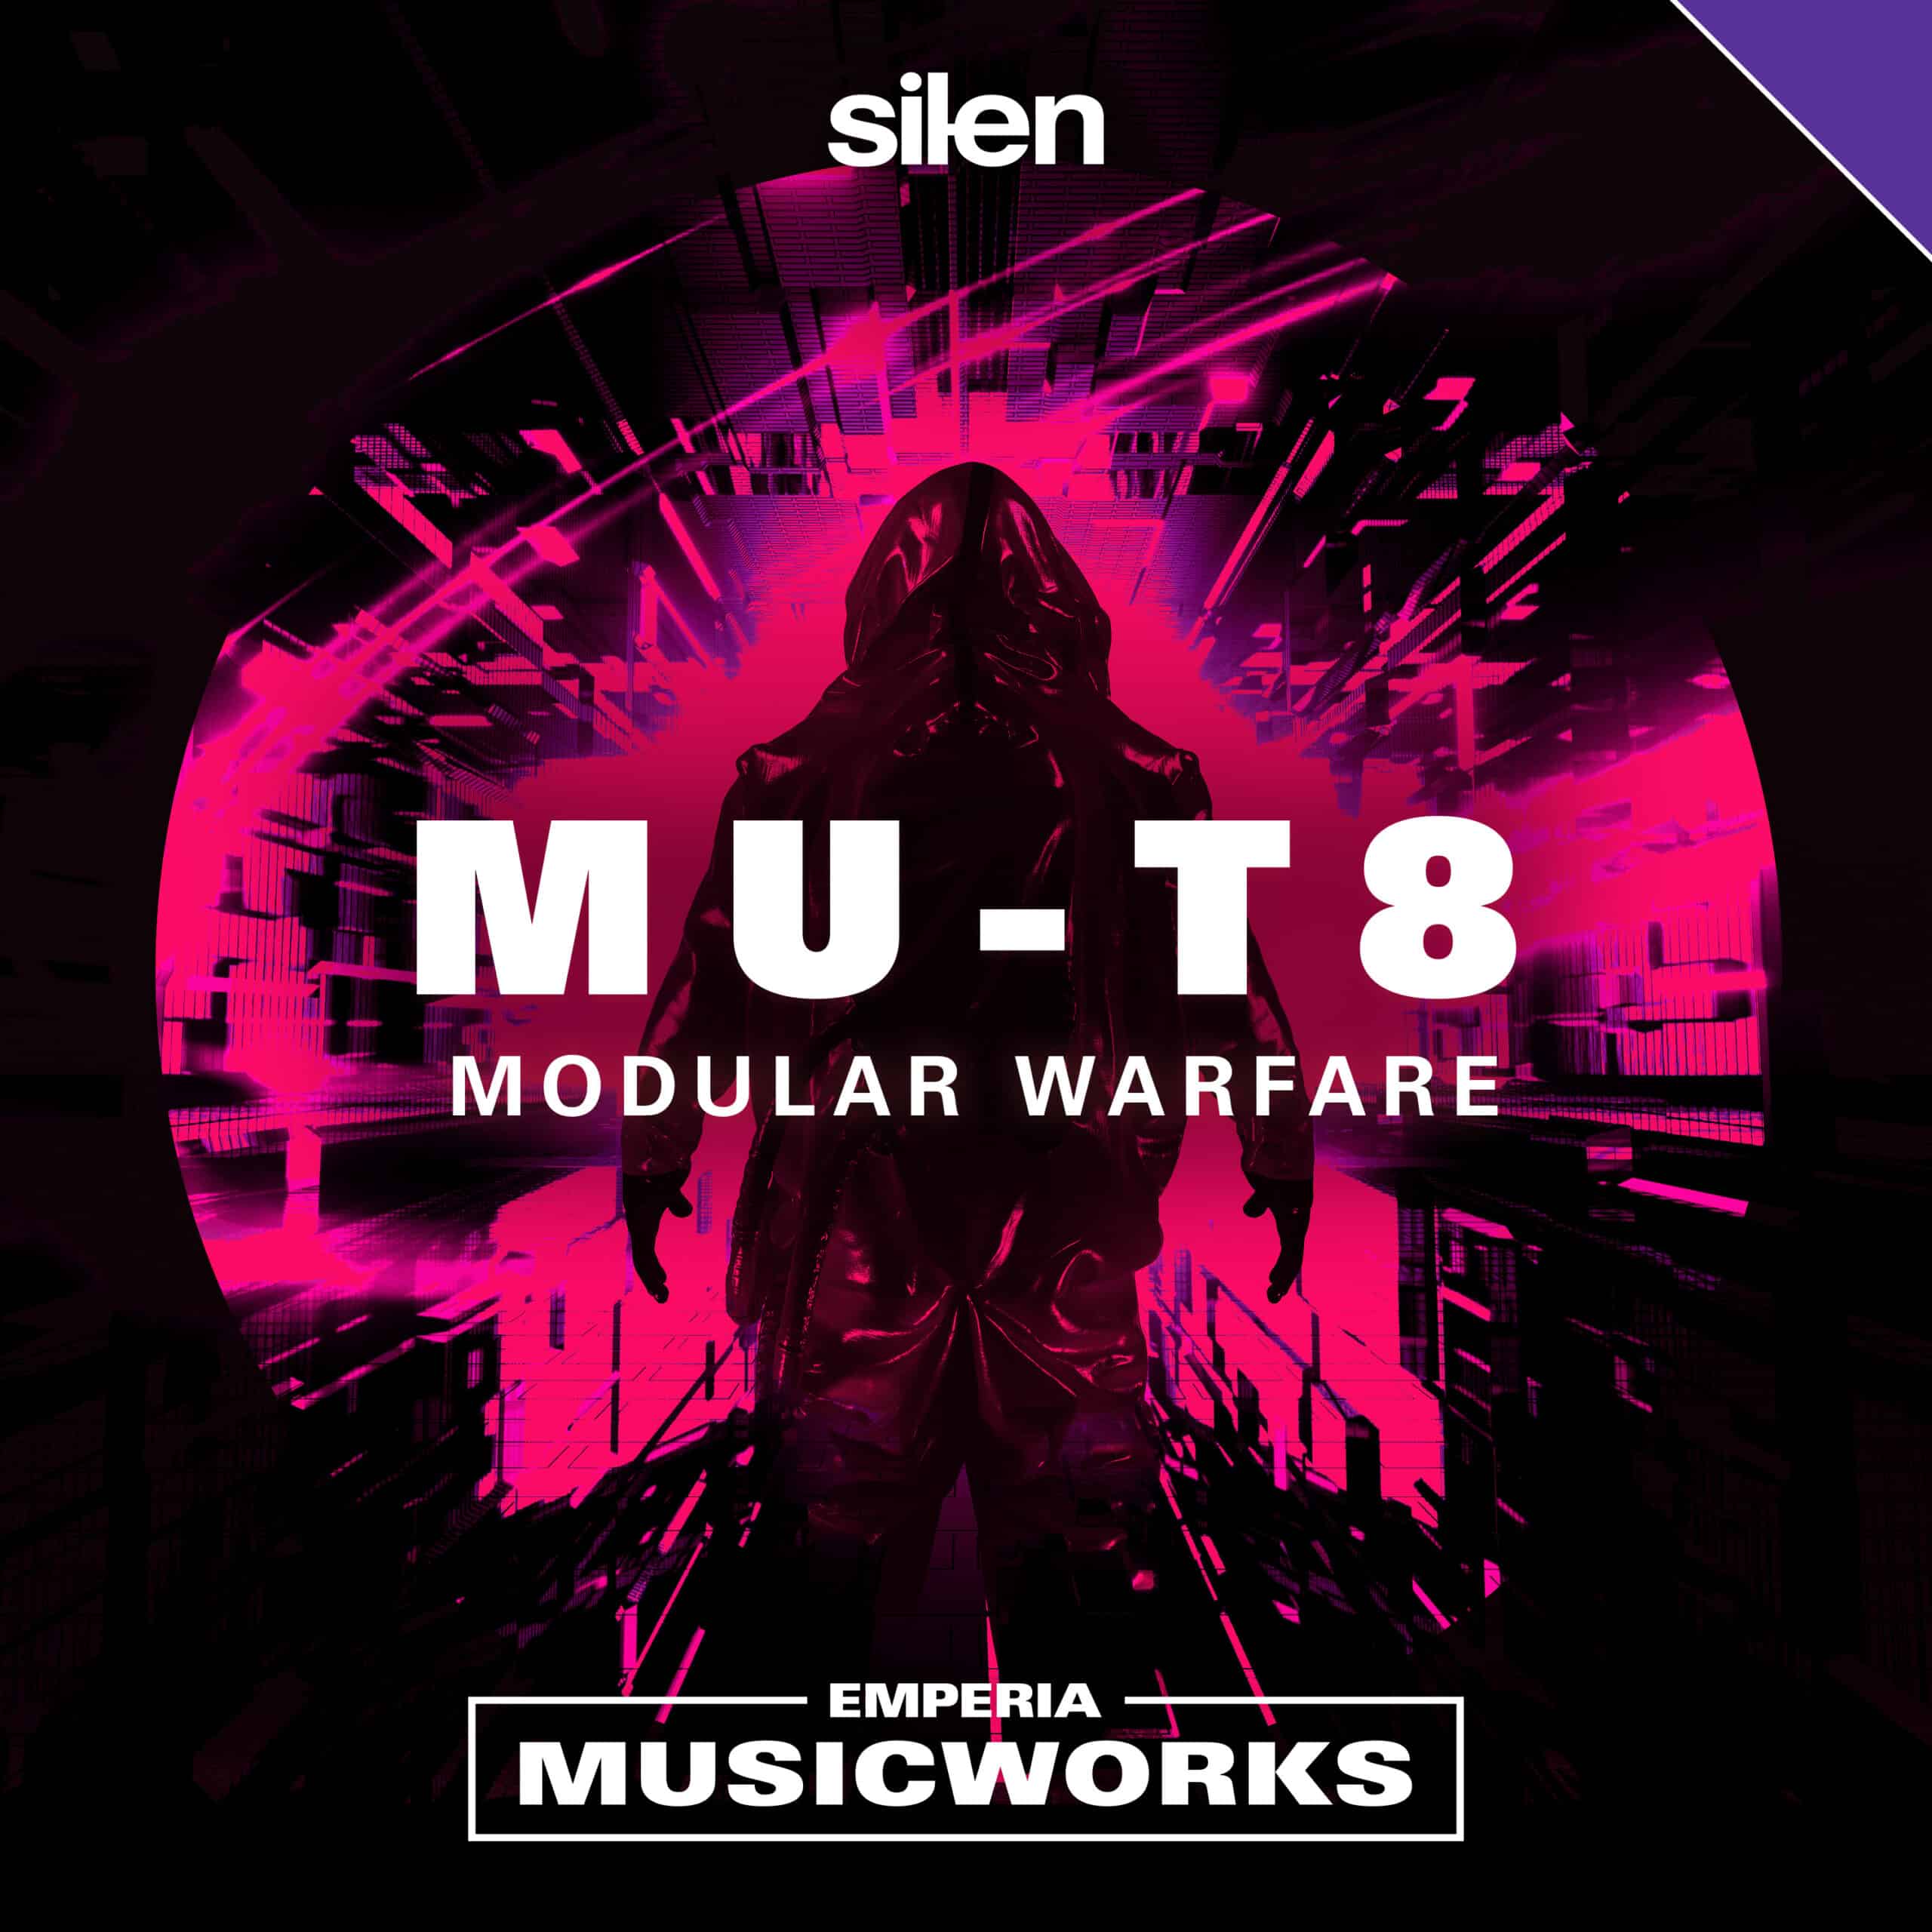 Mu-T8: Modular Warfare Forward propelling electronic music to get you focused and back in the game. Ambient elements with hard hitting percussion and synthesizers. Explosive energy with every song.